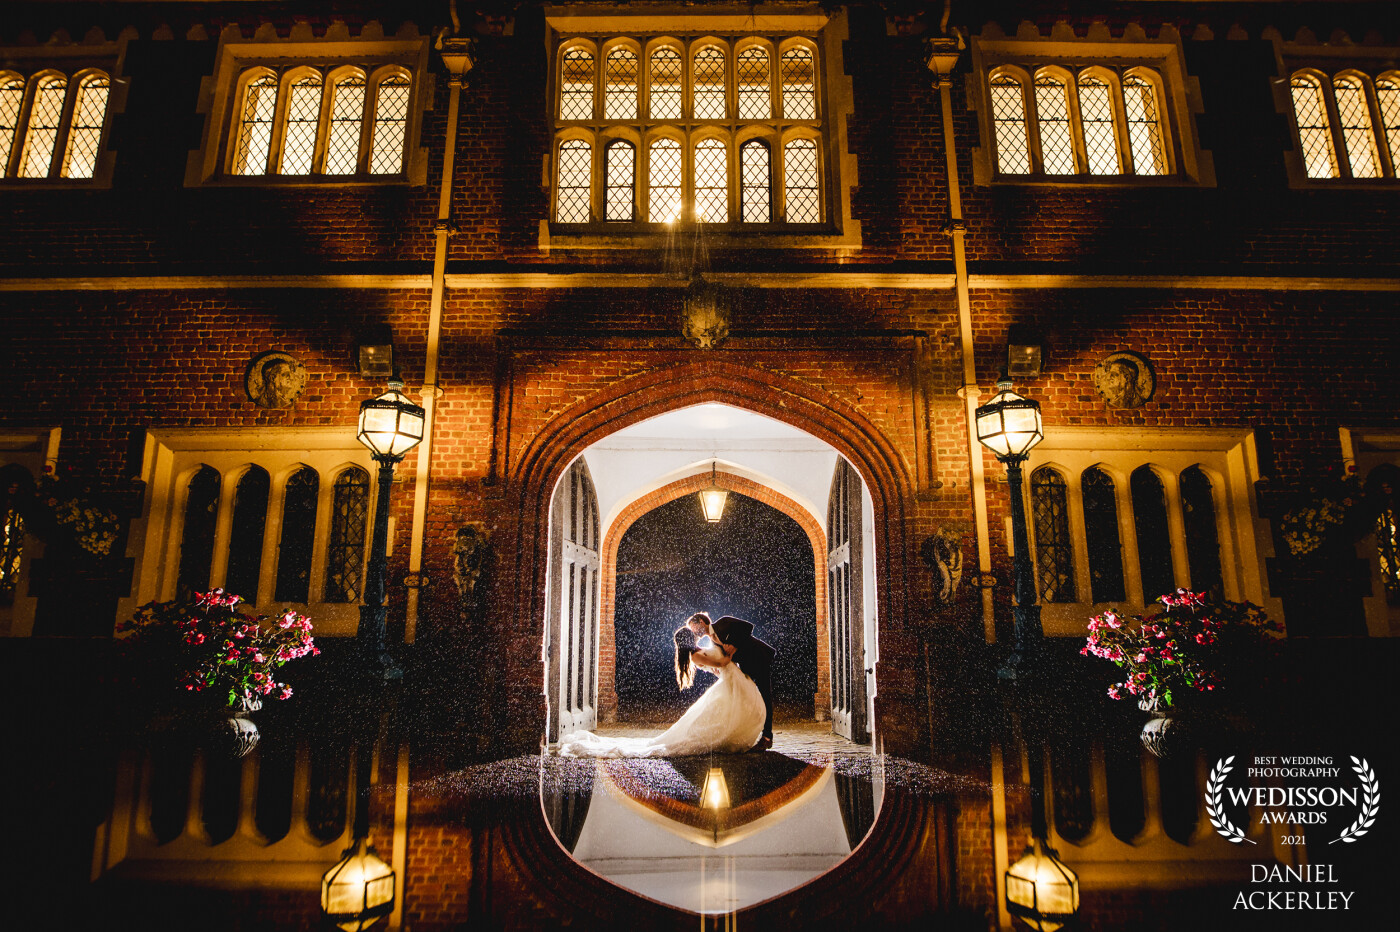 When I noticed the awesome lanterns, and the beautiful symmetry in Gosfield Hall, I just knew that as it got dark it would make for a great image, but as soon as it began raining I knew that was the PERFECT time to get Charlotte & James outside to make it happen and it worked out perfectly :-)